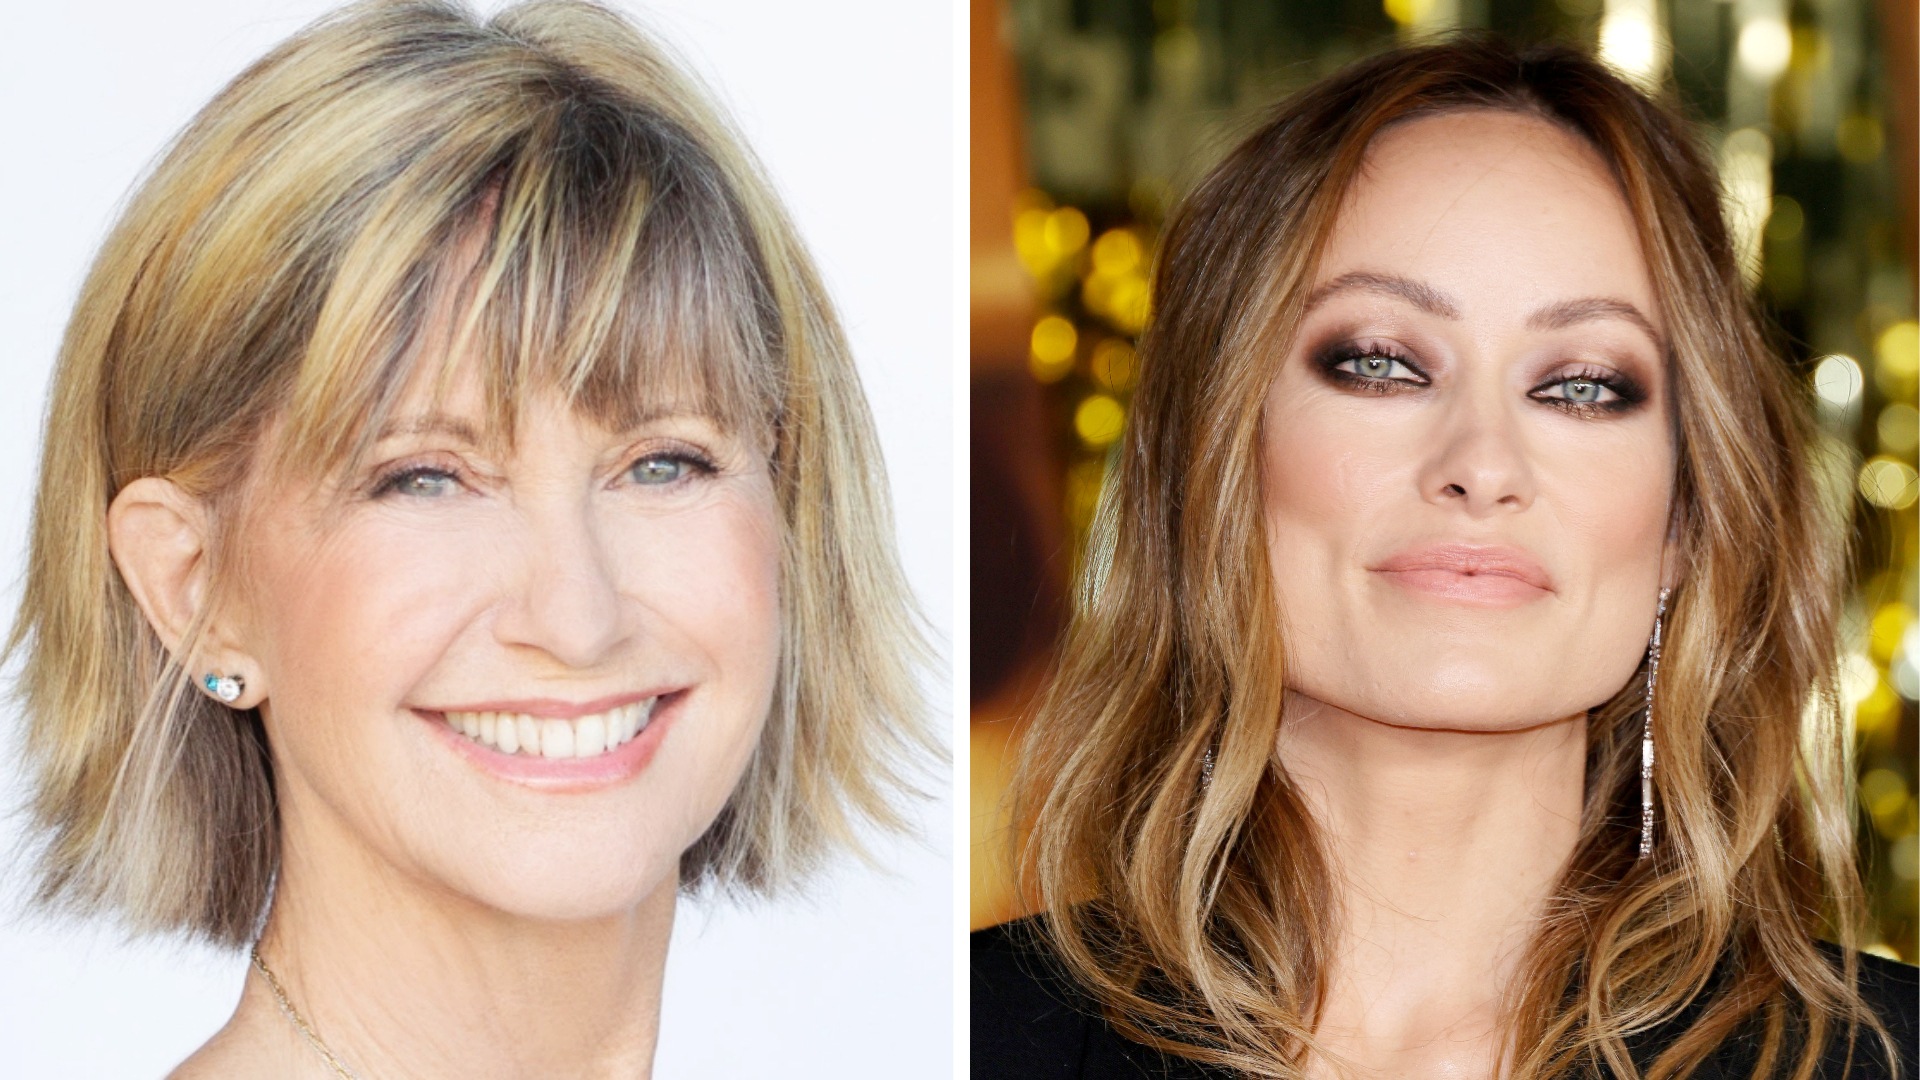 Olivia Newton-John, who died in August 2022, and Olivia Wilde